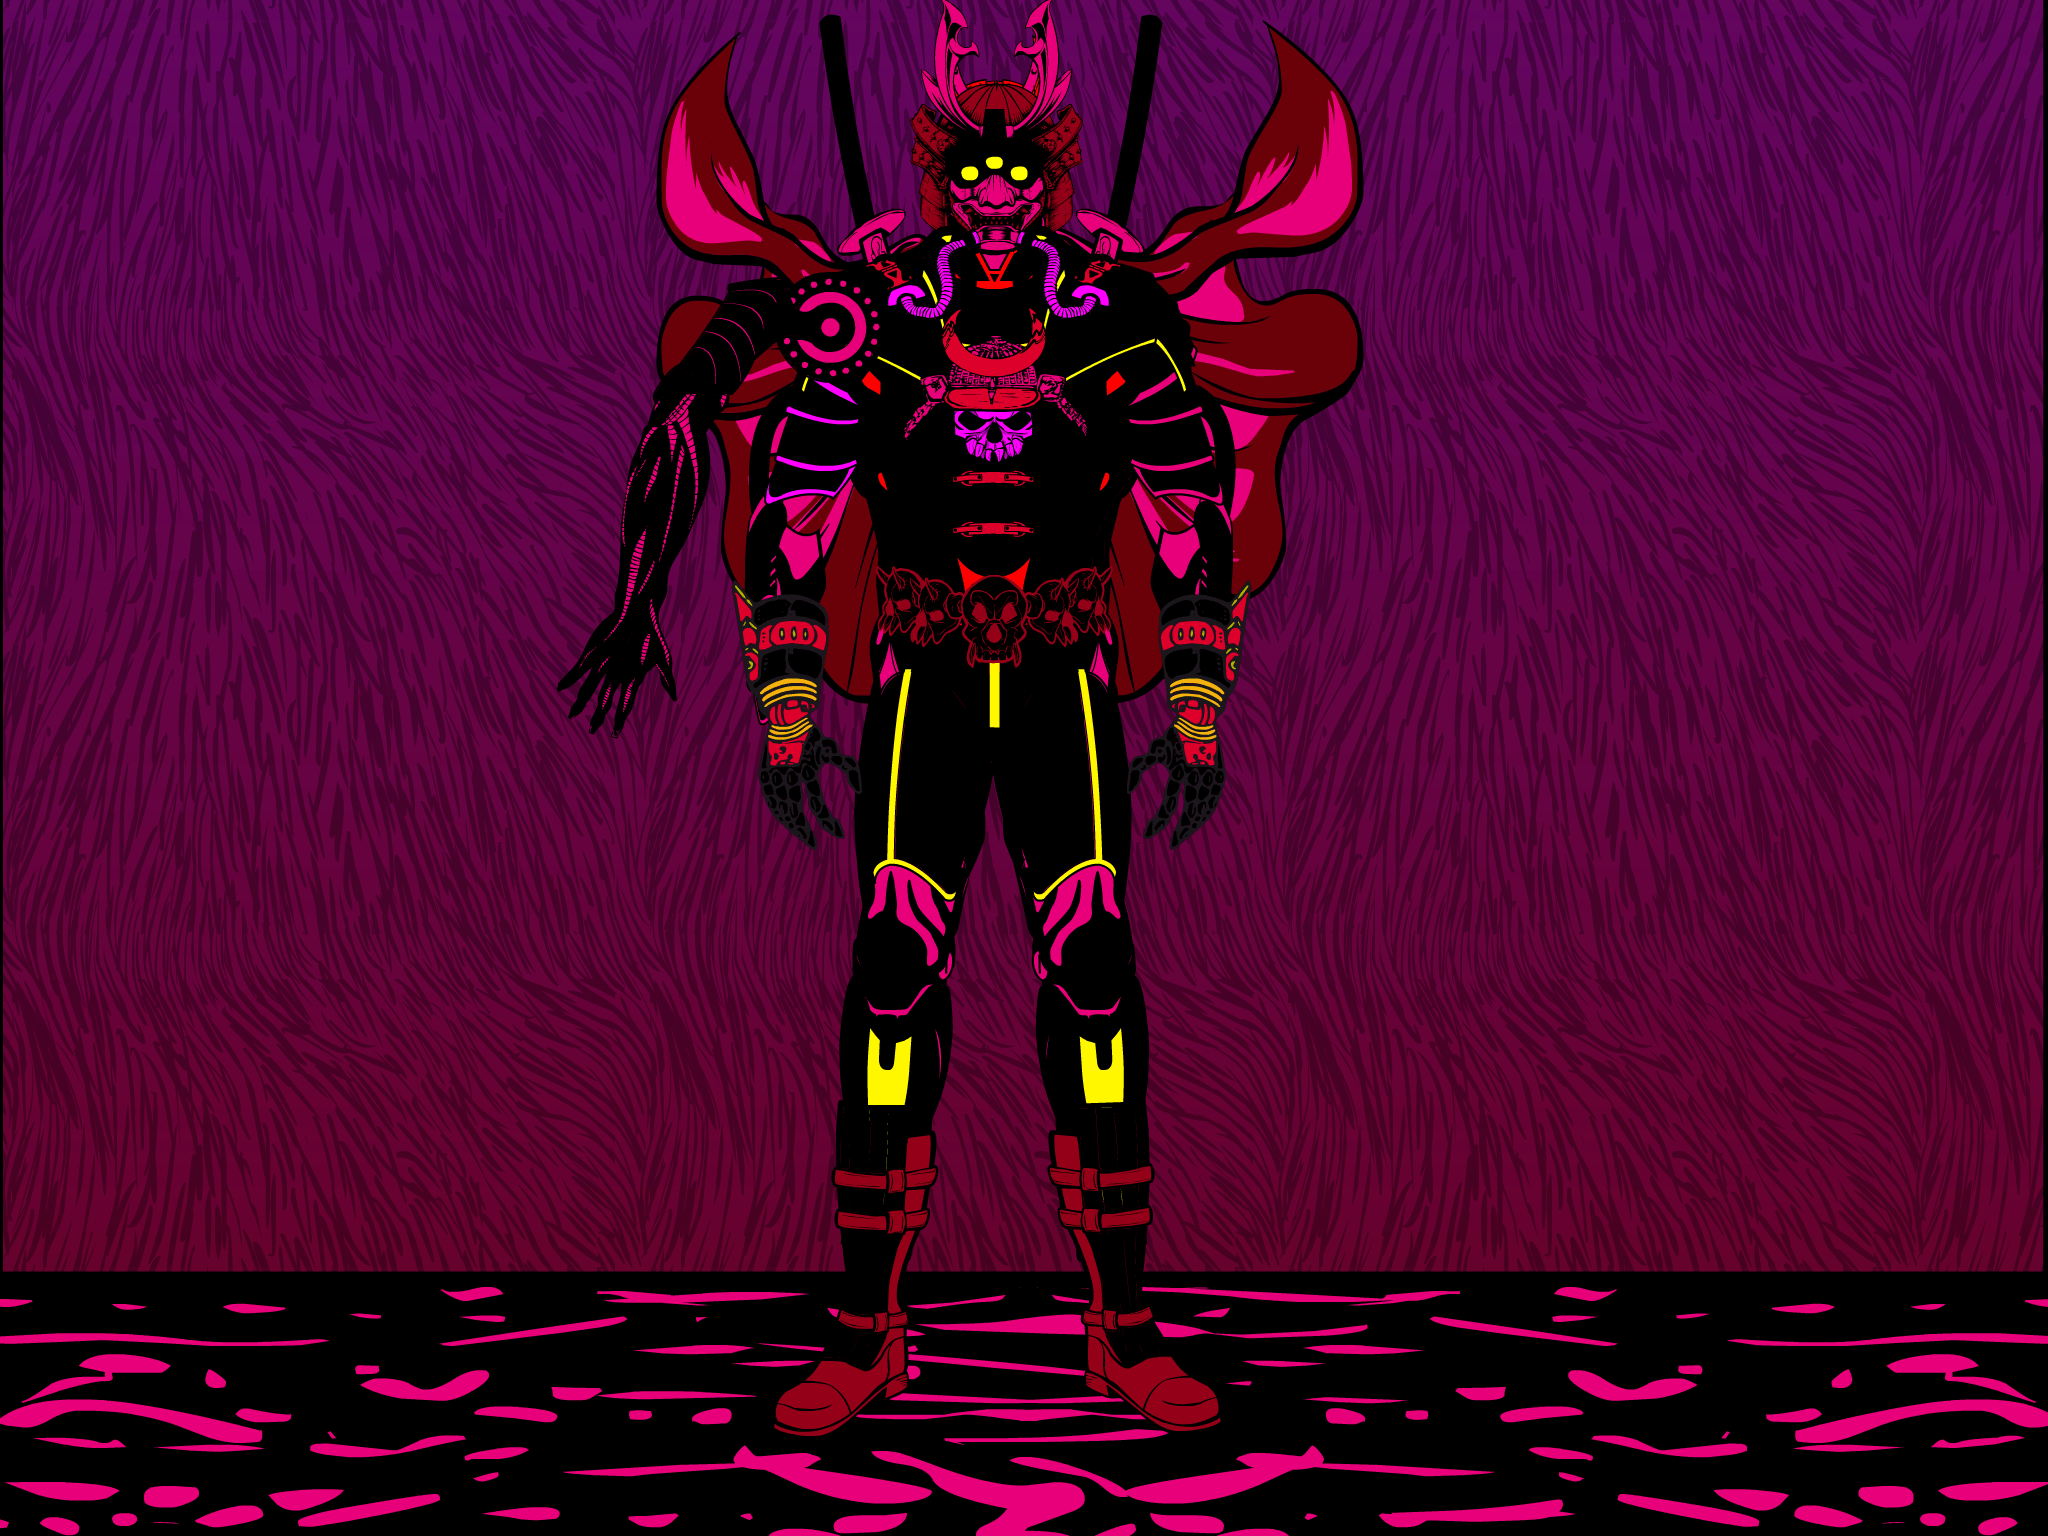 Another character concept of mine, The Neon Samurai